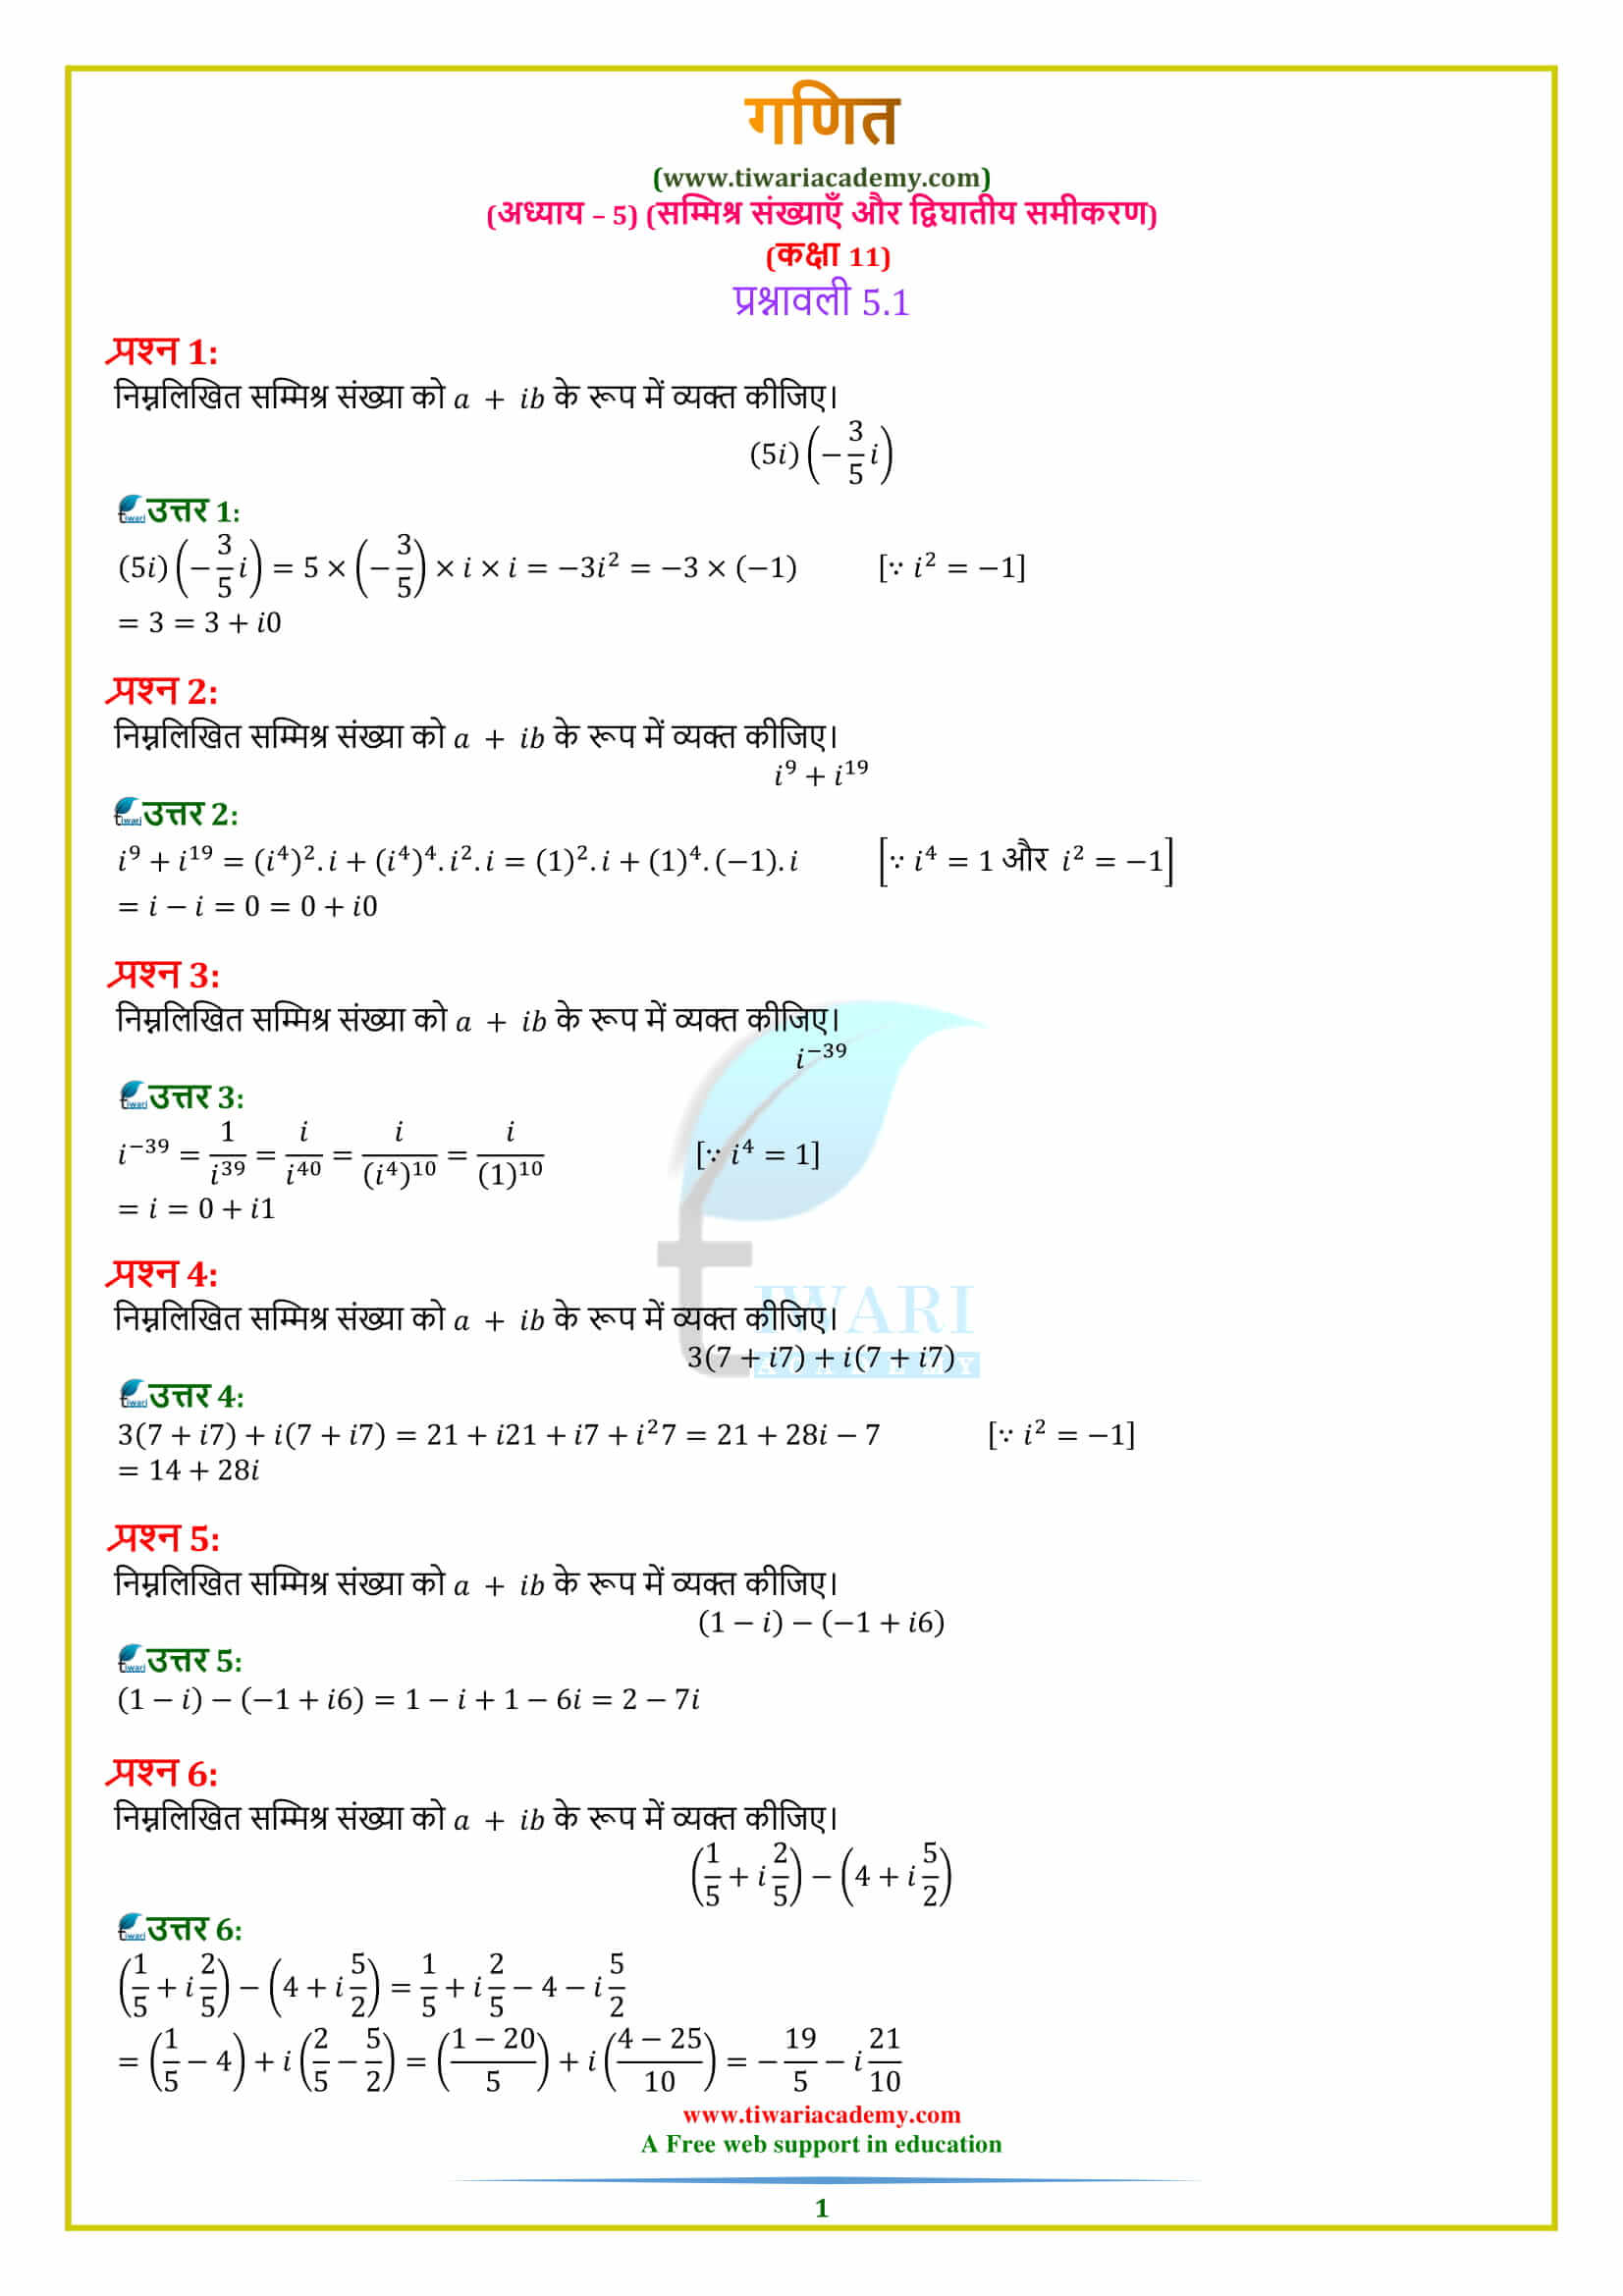 NCERT Solutions for Class 11 Maths Chapter 5 Exercise 5.1 in Hindi